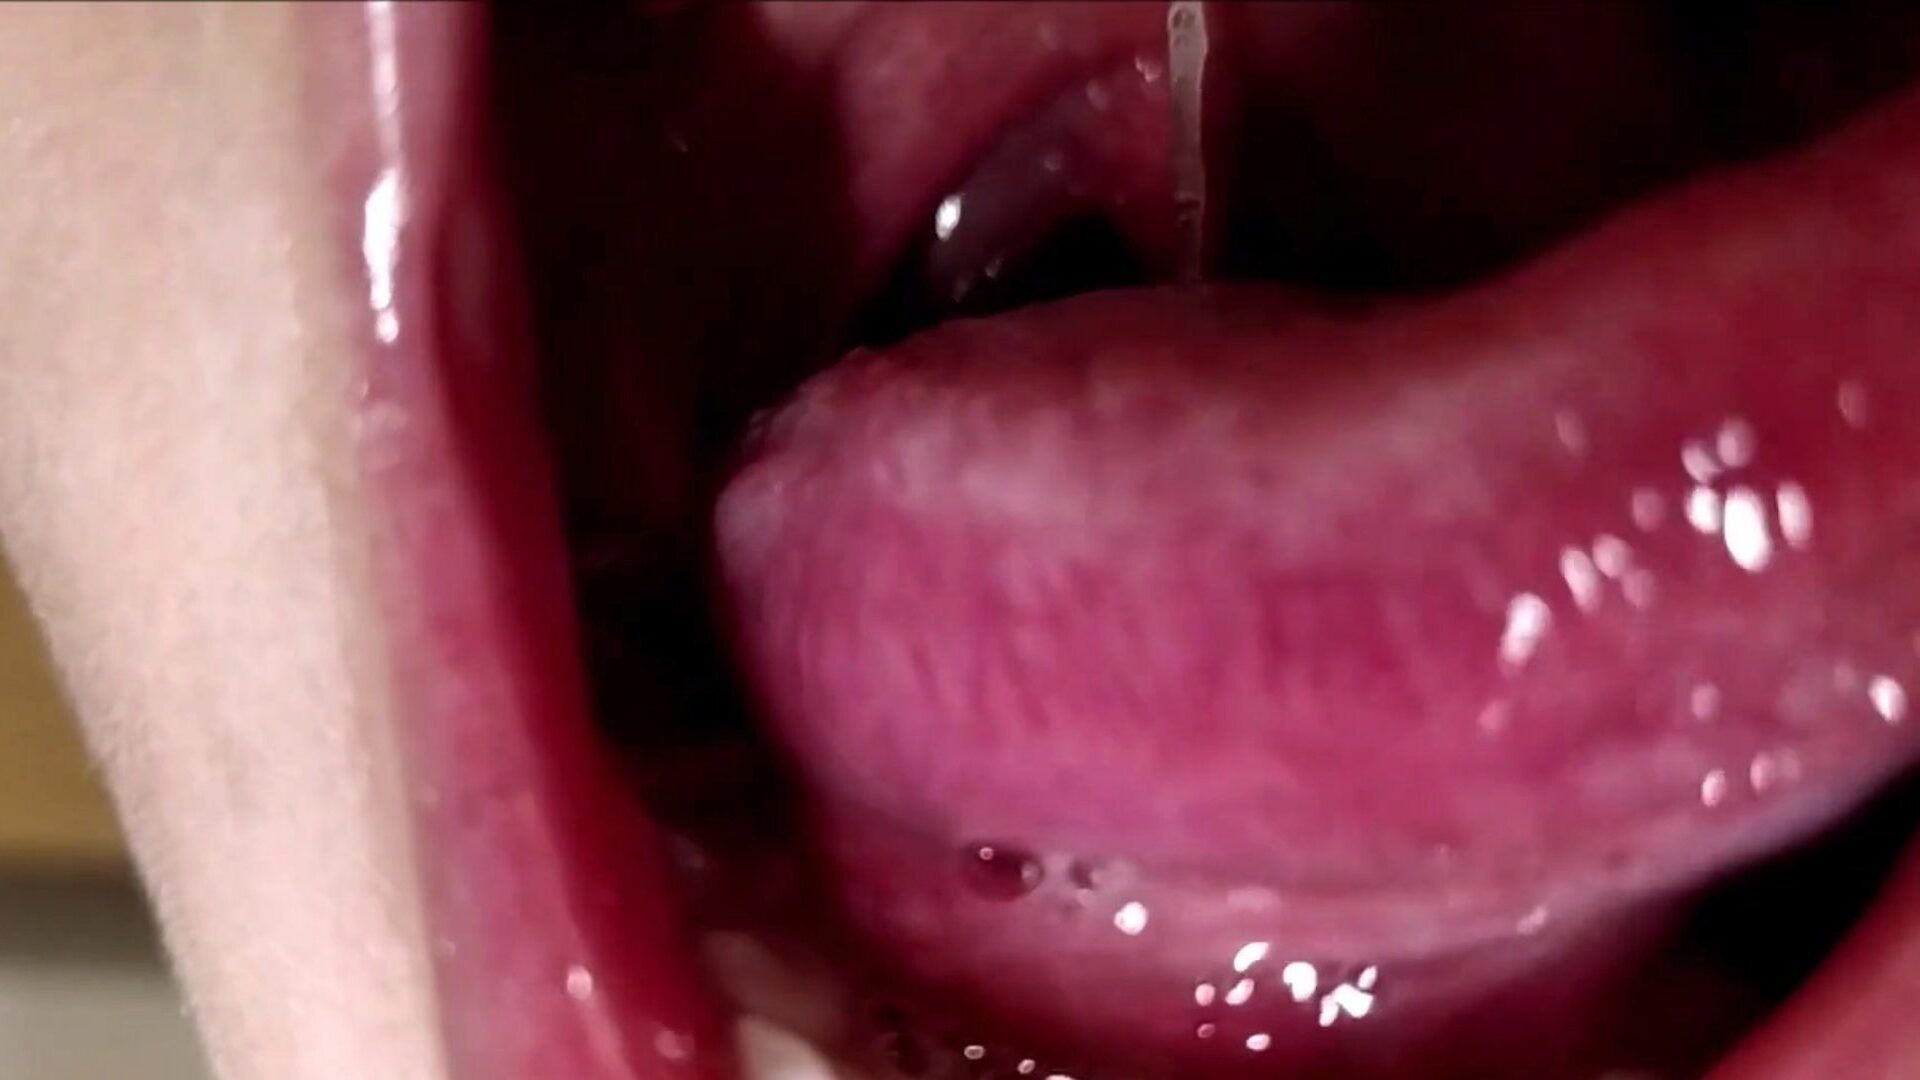 Mouth, vore a and drool fetish of November Aug 12th 2021